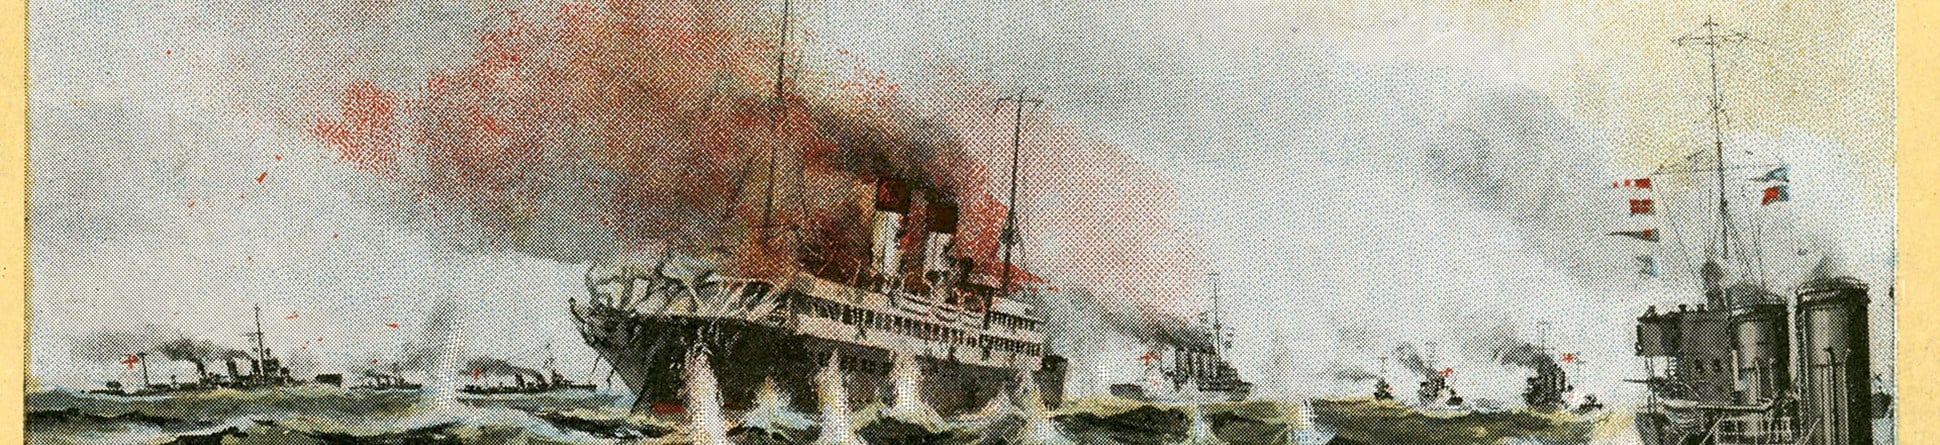 The Königin Luise was a German ferry converted into a mine layer. She was sunk on 5 August 1914 by three Royal Navy vessels, during the action HMS Lance fired the first Royal Navy shot of the war. Ironically, the next day HMS Amphion was sunk by the Königin Luise’s mines; the first British naval loss of the war and the first loss of British lives in action.  A dramatic reconstruction shows the Königin Luise under fire from pursuing British naval vessels.